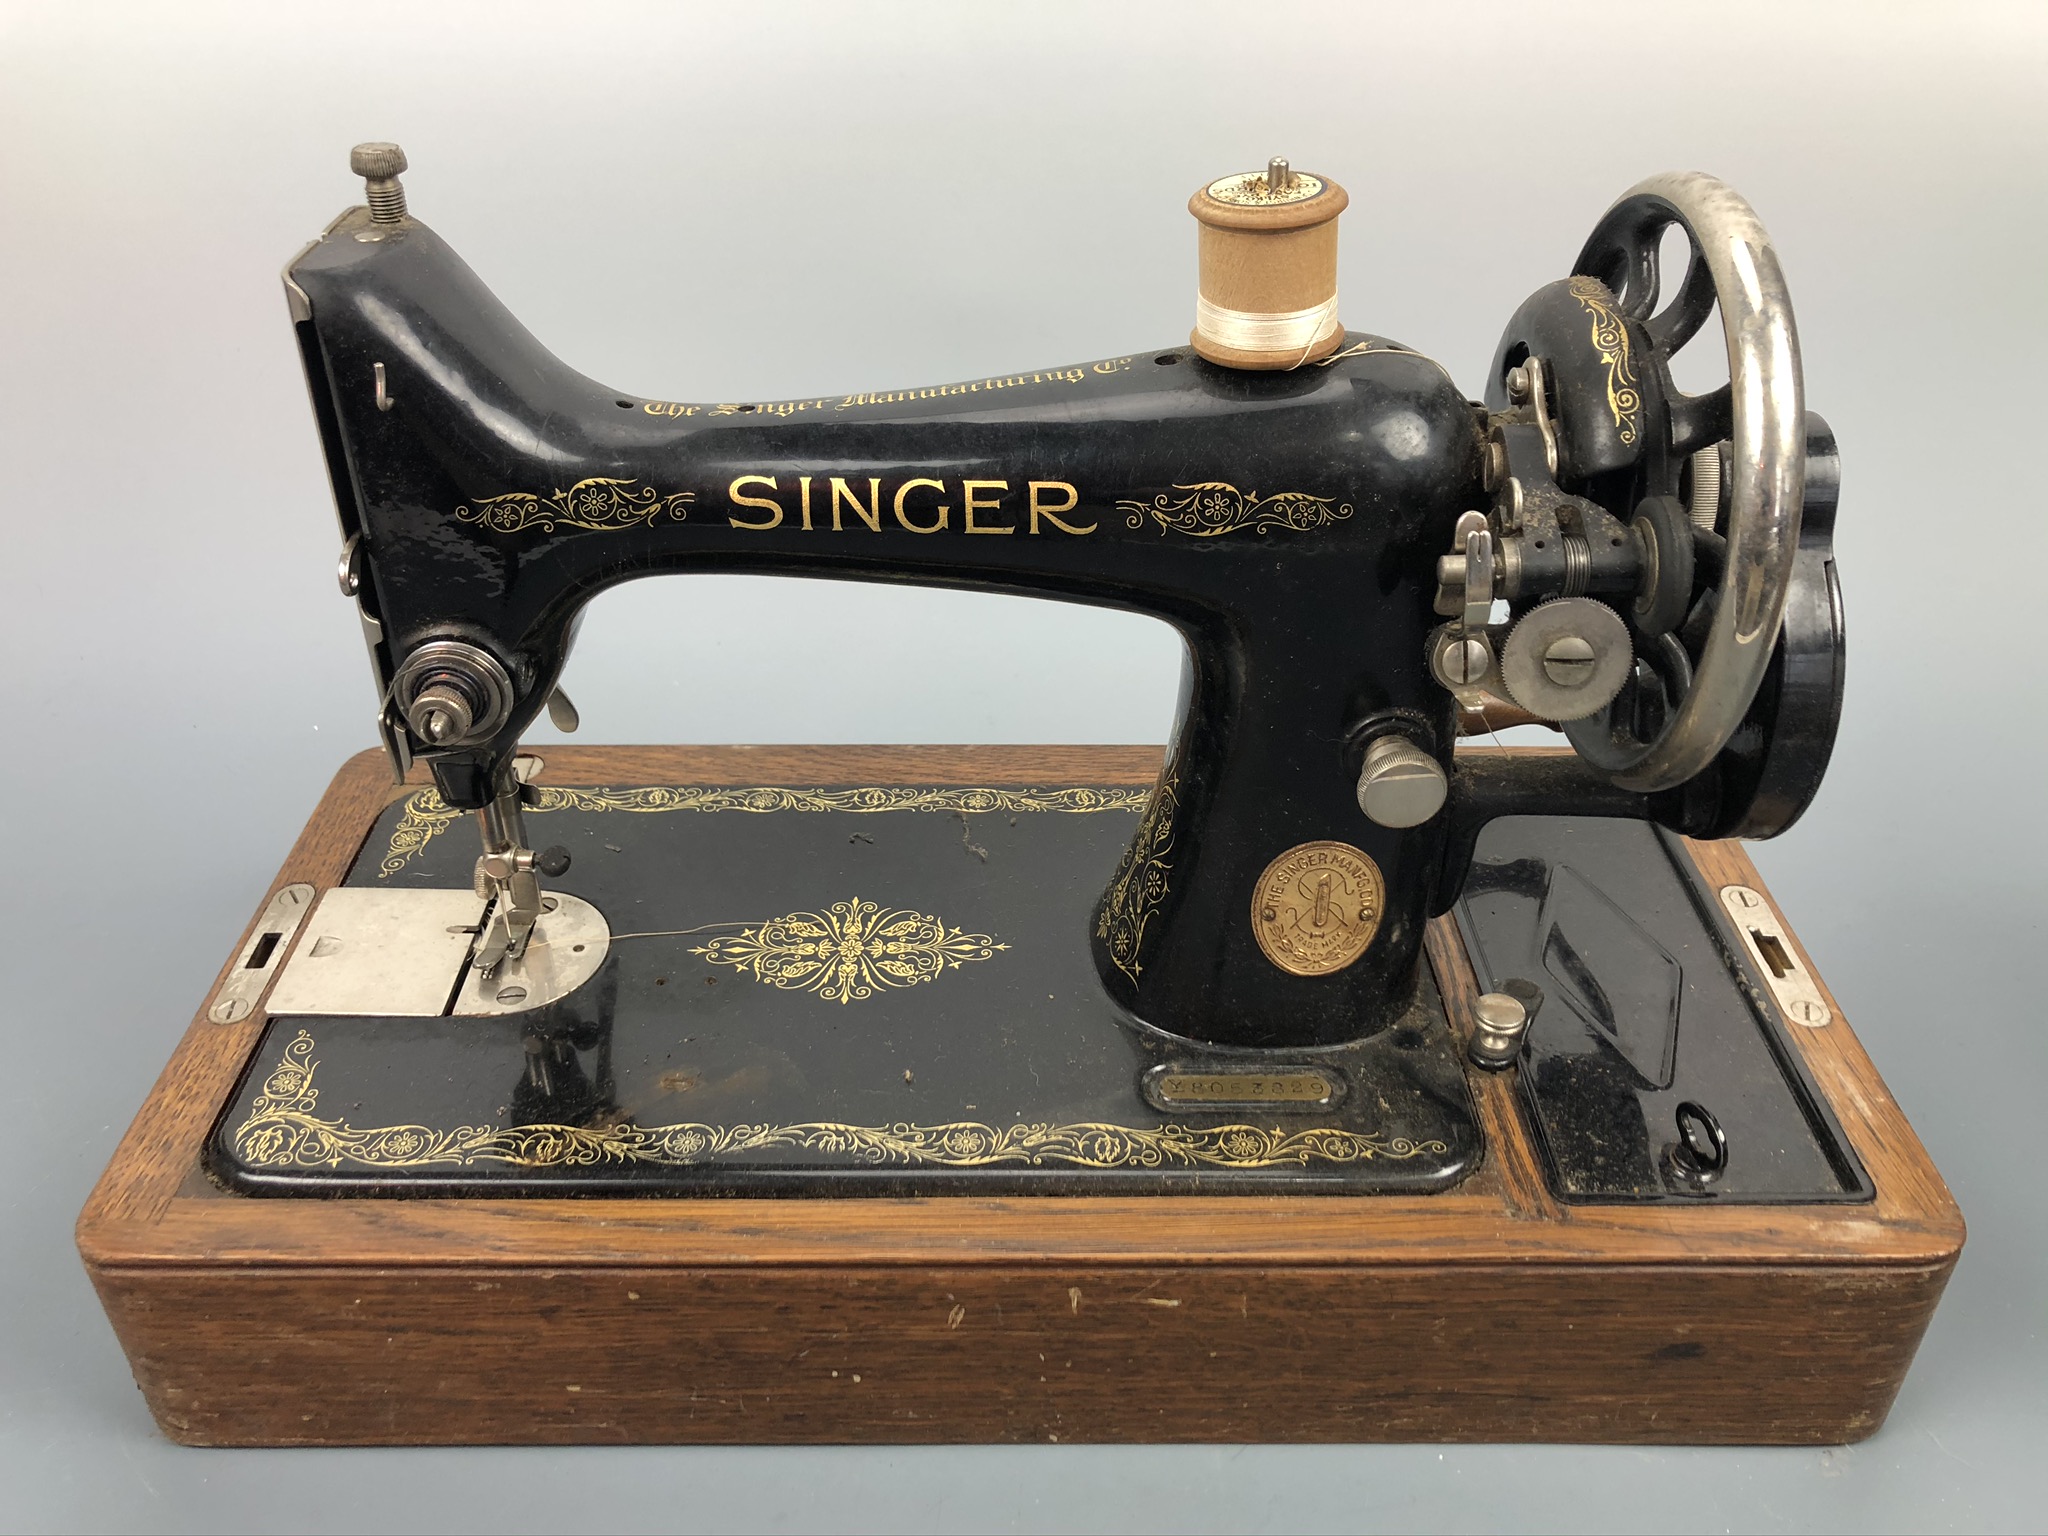 A Singer table model sewing machine, serial 8053829